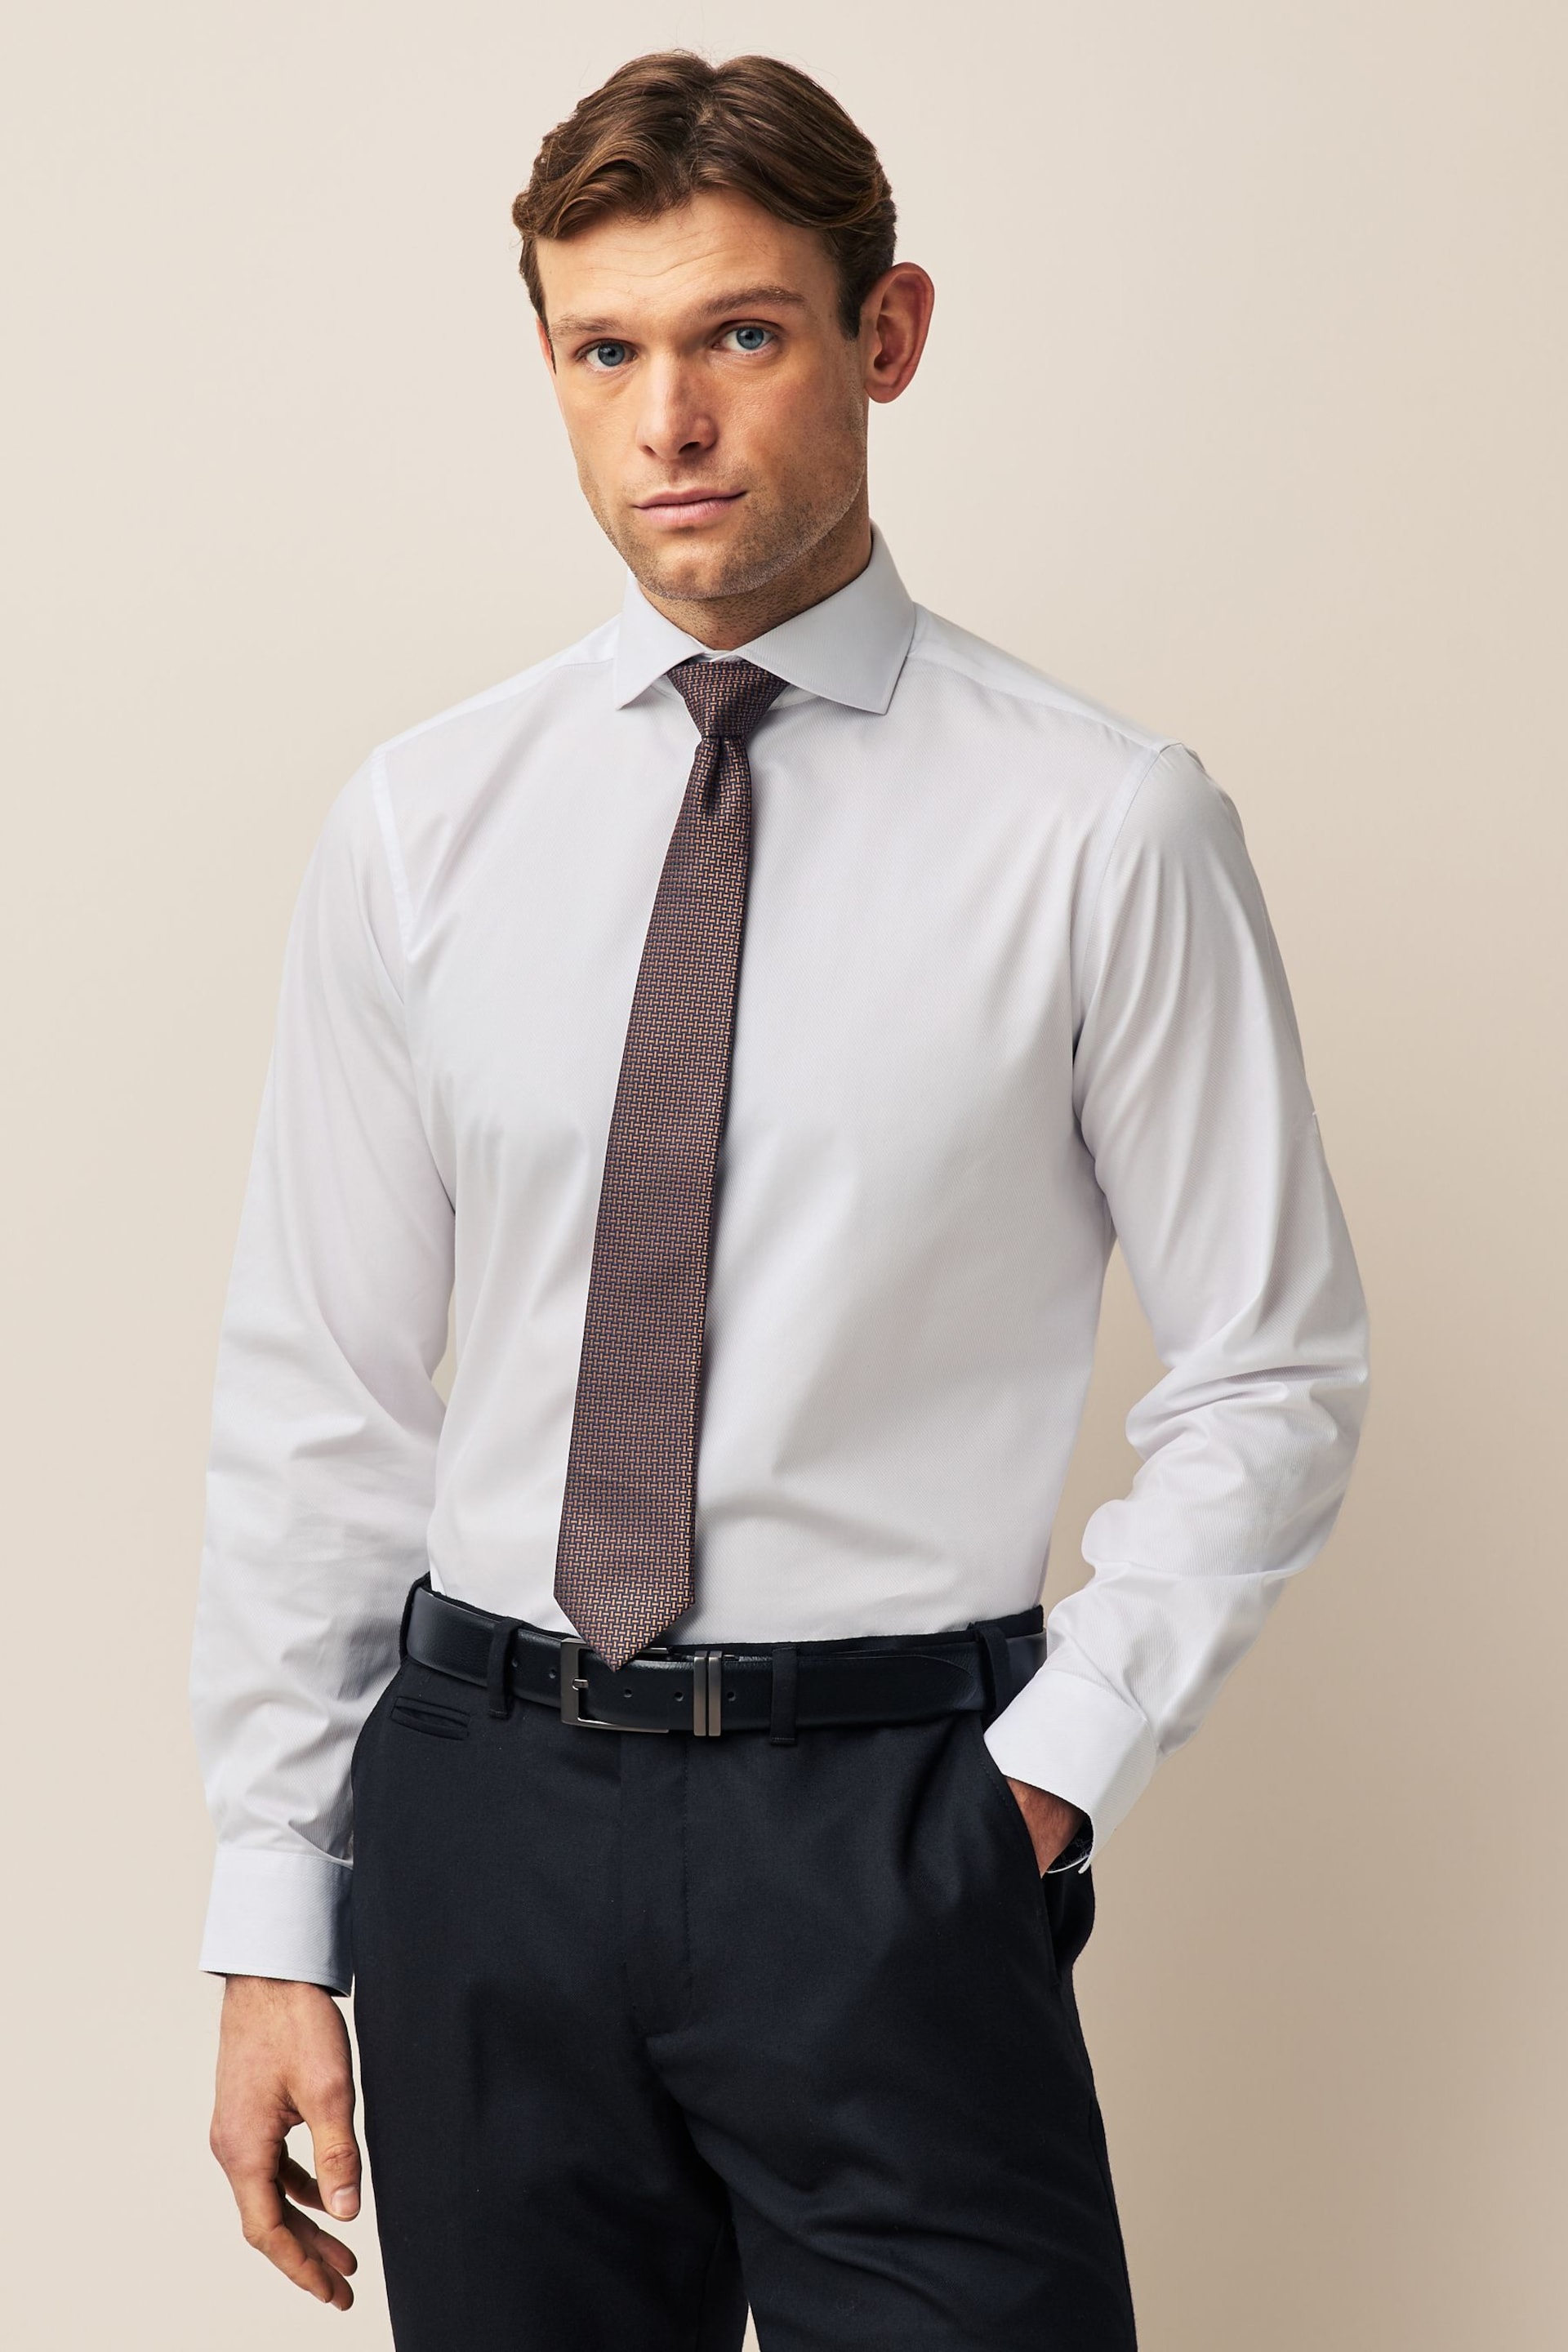 White/Bronze Brown Regular Fit Single Cuff Shirt And Tie Pack - Image 1 of 8